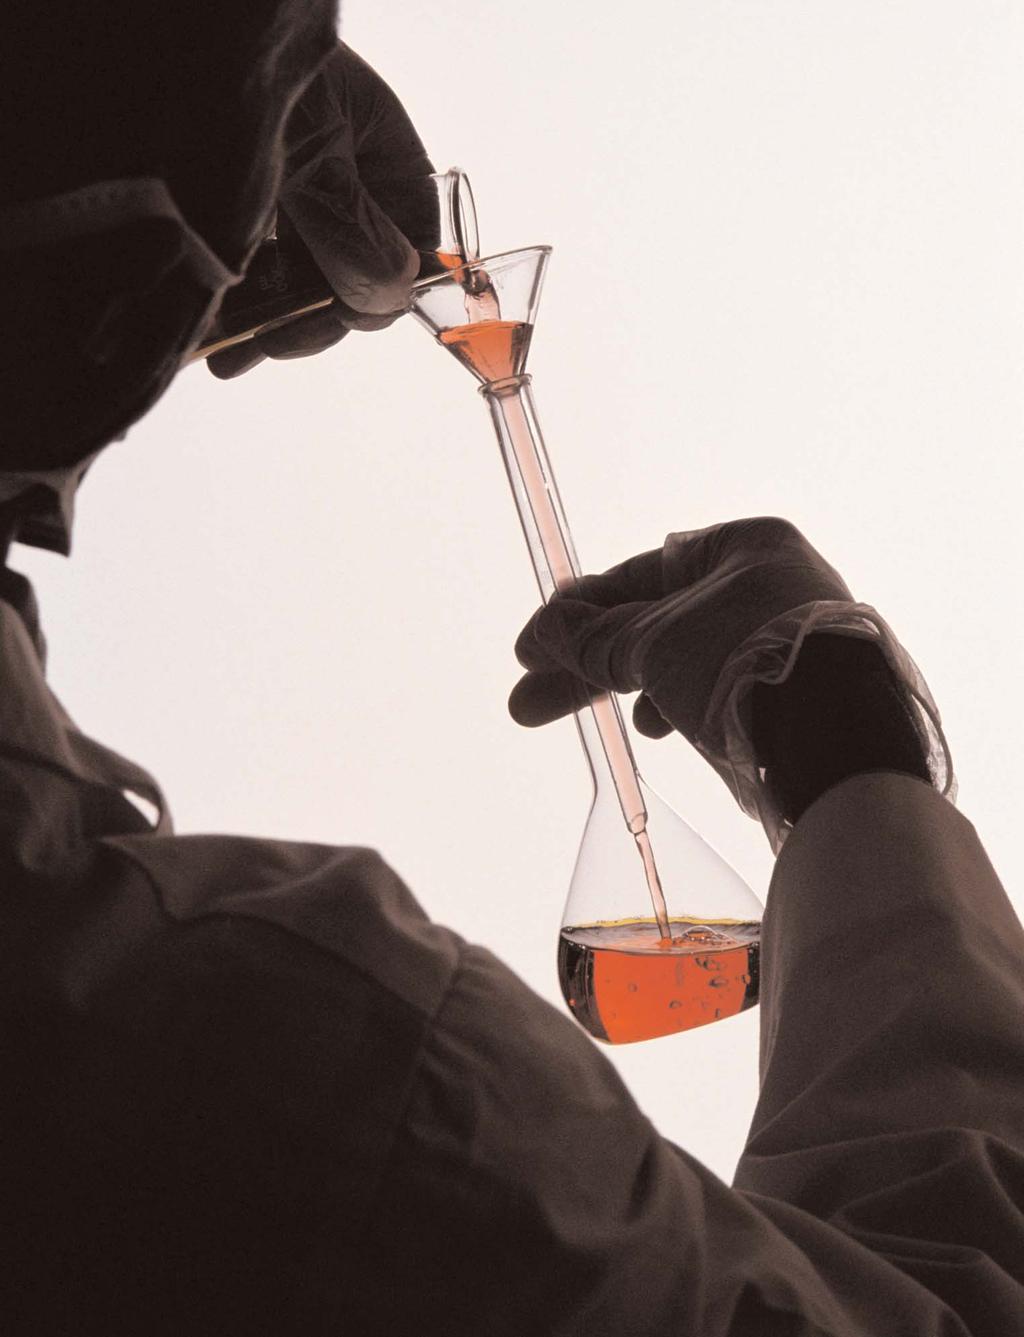 REAGENT CHEMICALS Specifications and Procedures